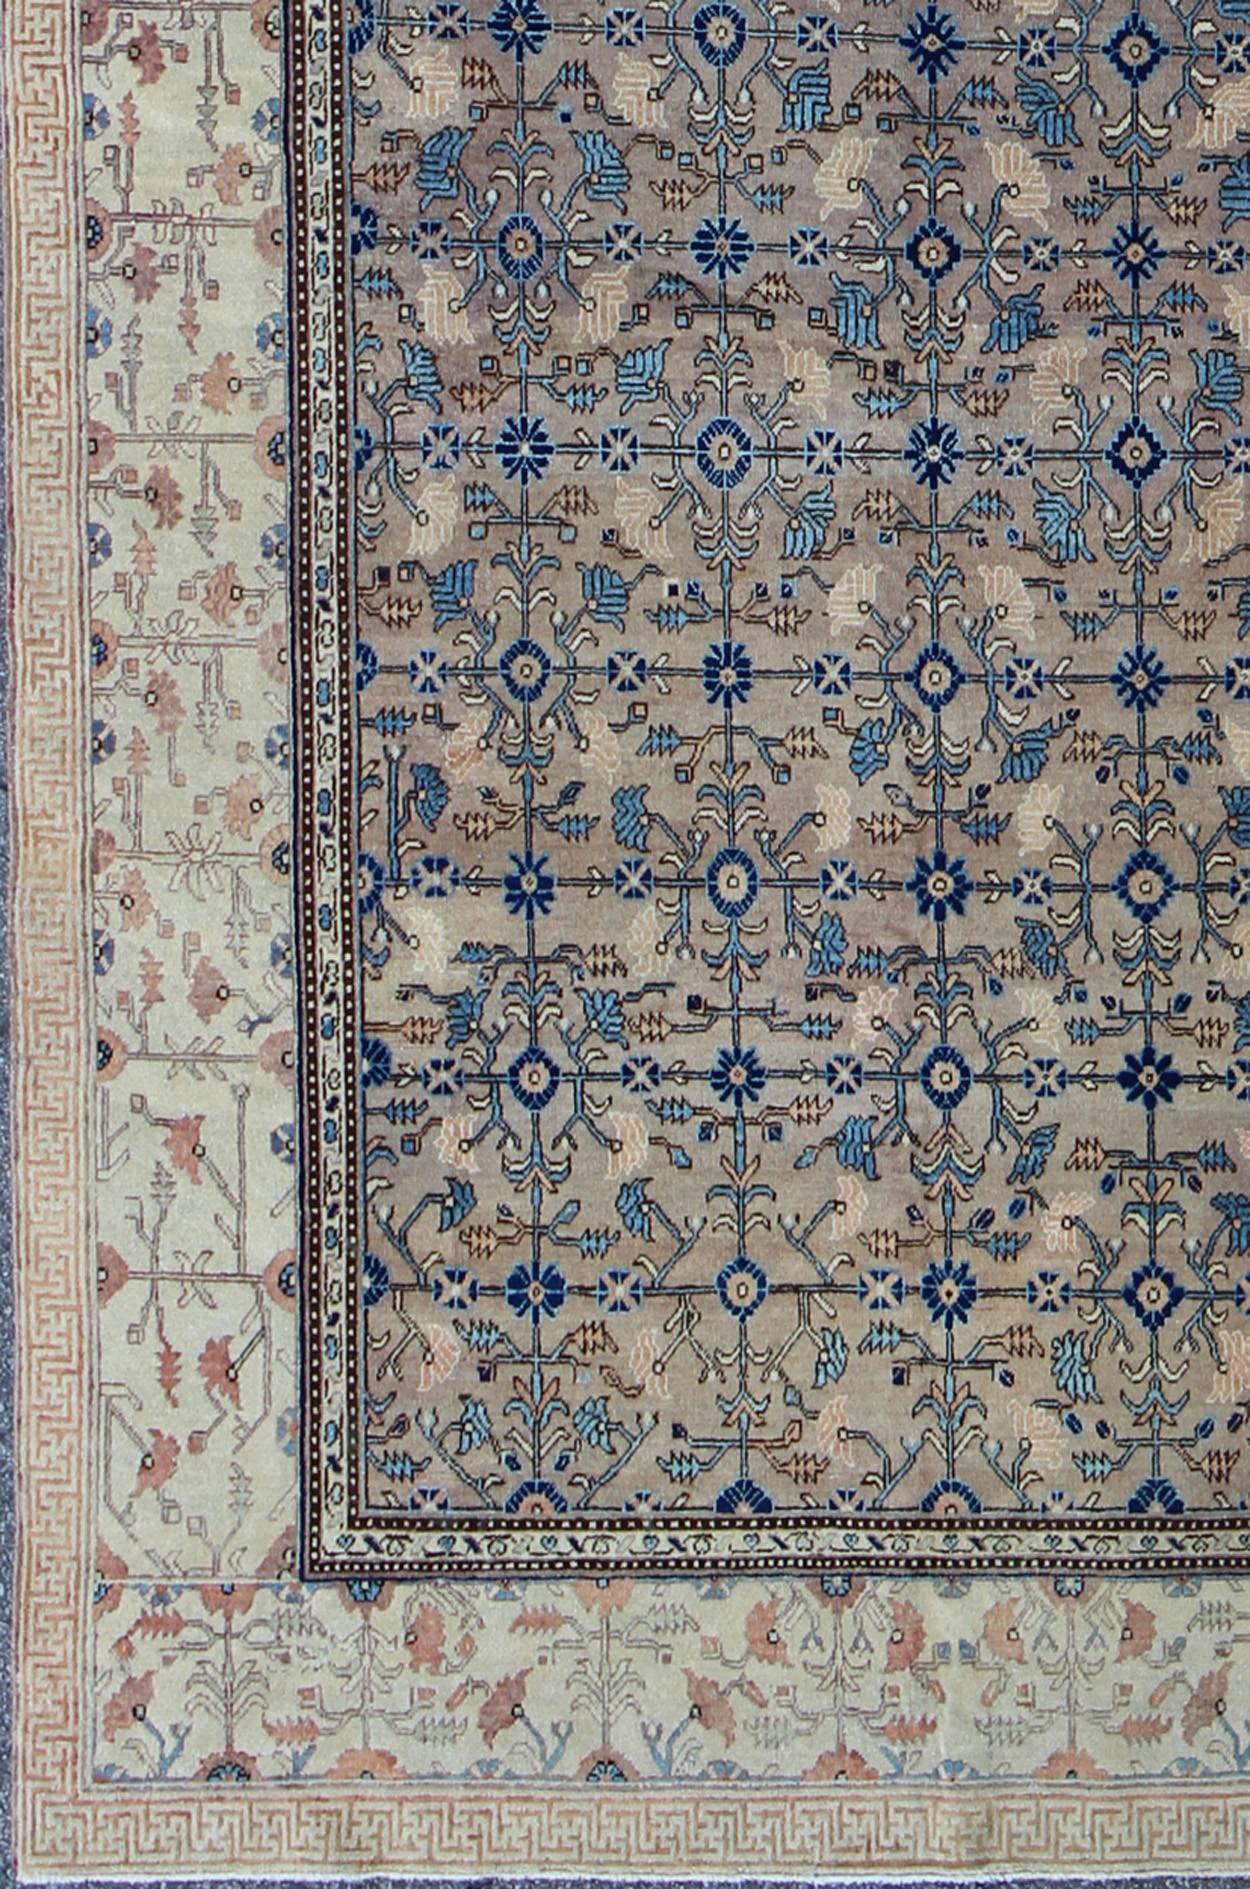 This attractive antique Khotan rug is a spectacular testament to the complexity of Turkestan design. The gray central field plays host to a stunning display of entwined blossoms and botanical elements. The complementary border is a testament to the